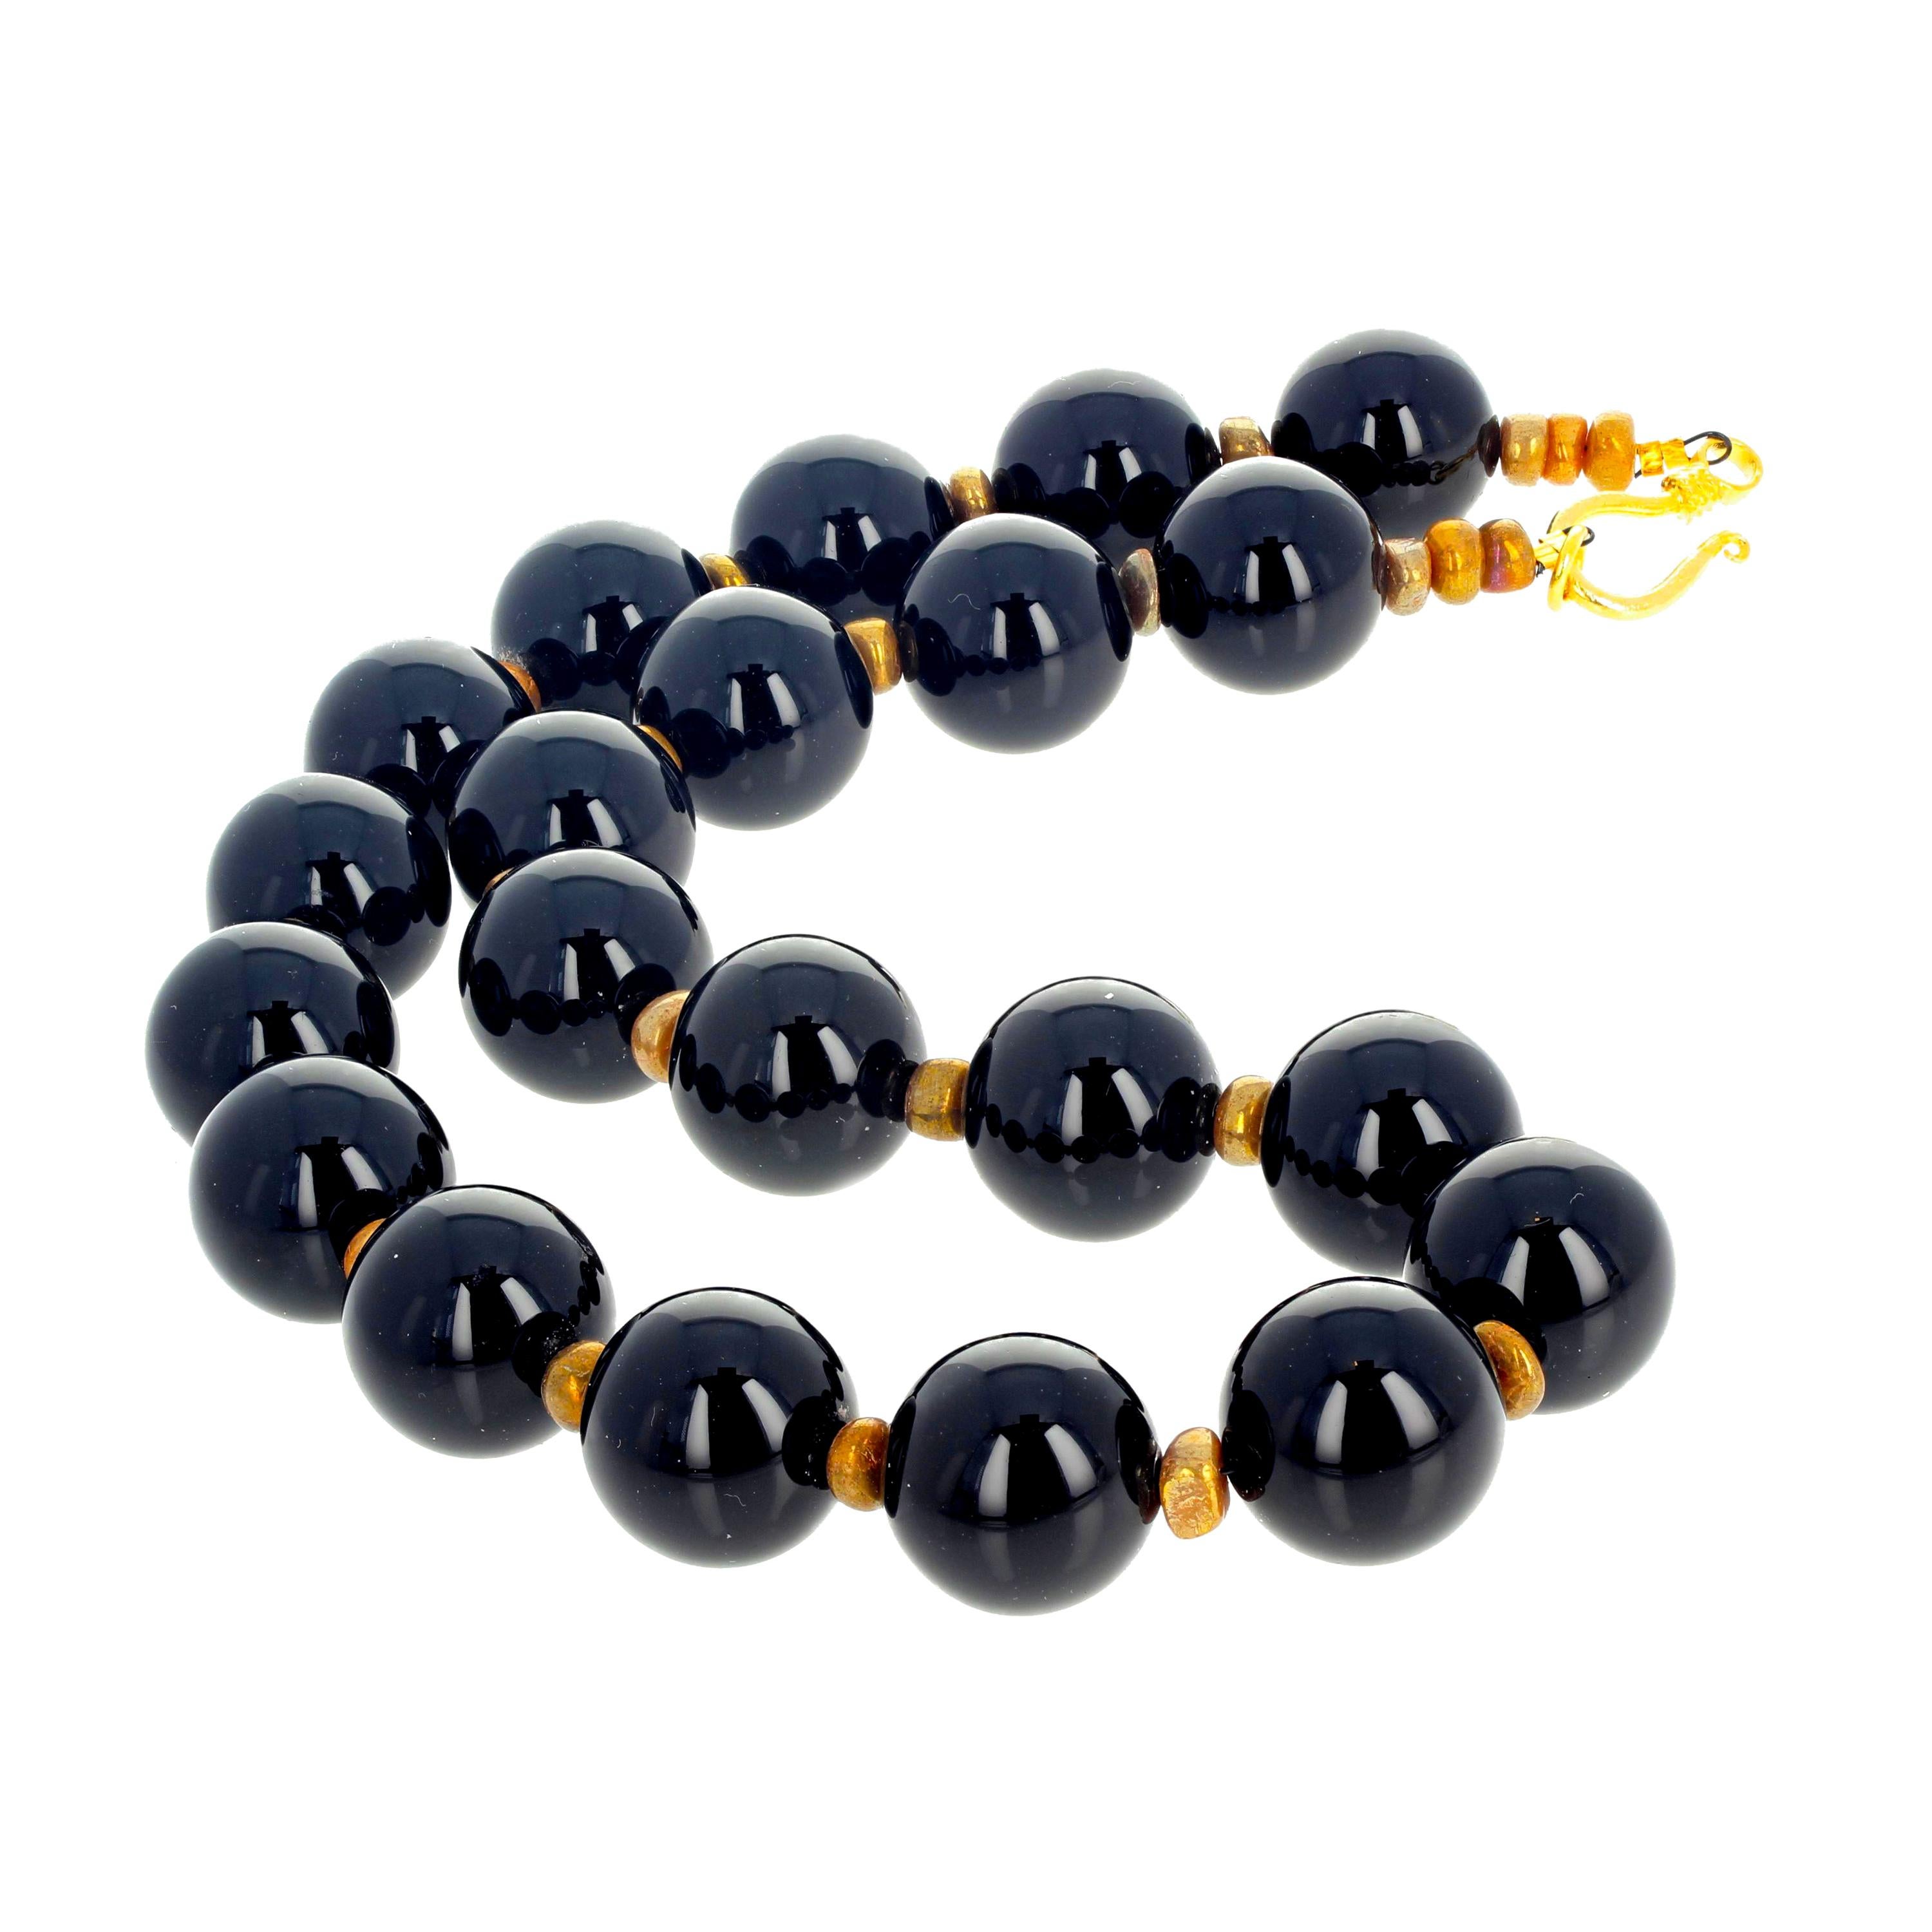 AJD 19.75" Classic Brilliantly Polished Black Onyx & Real Golden Coral Necklace